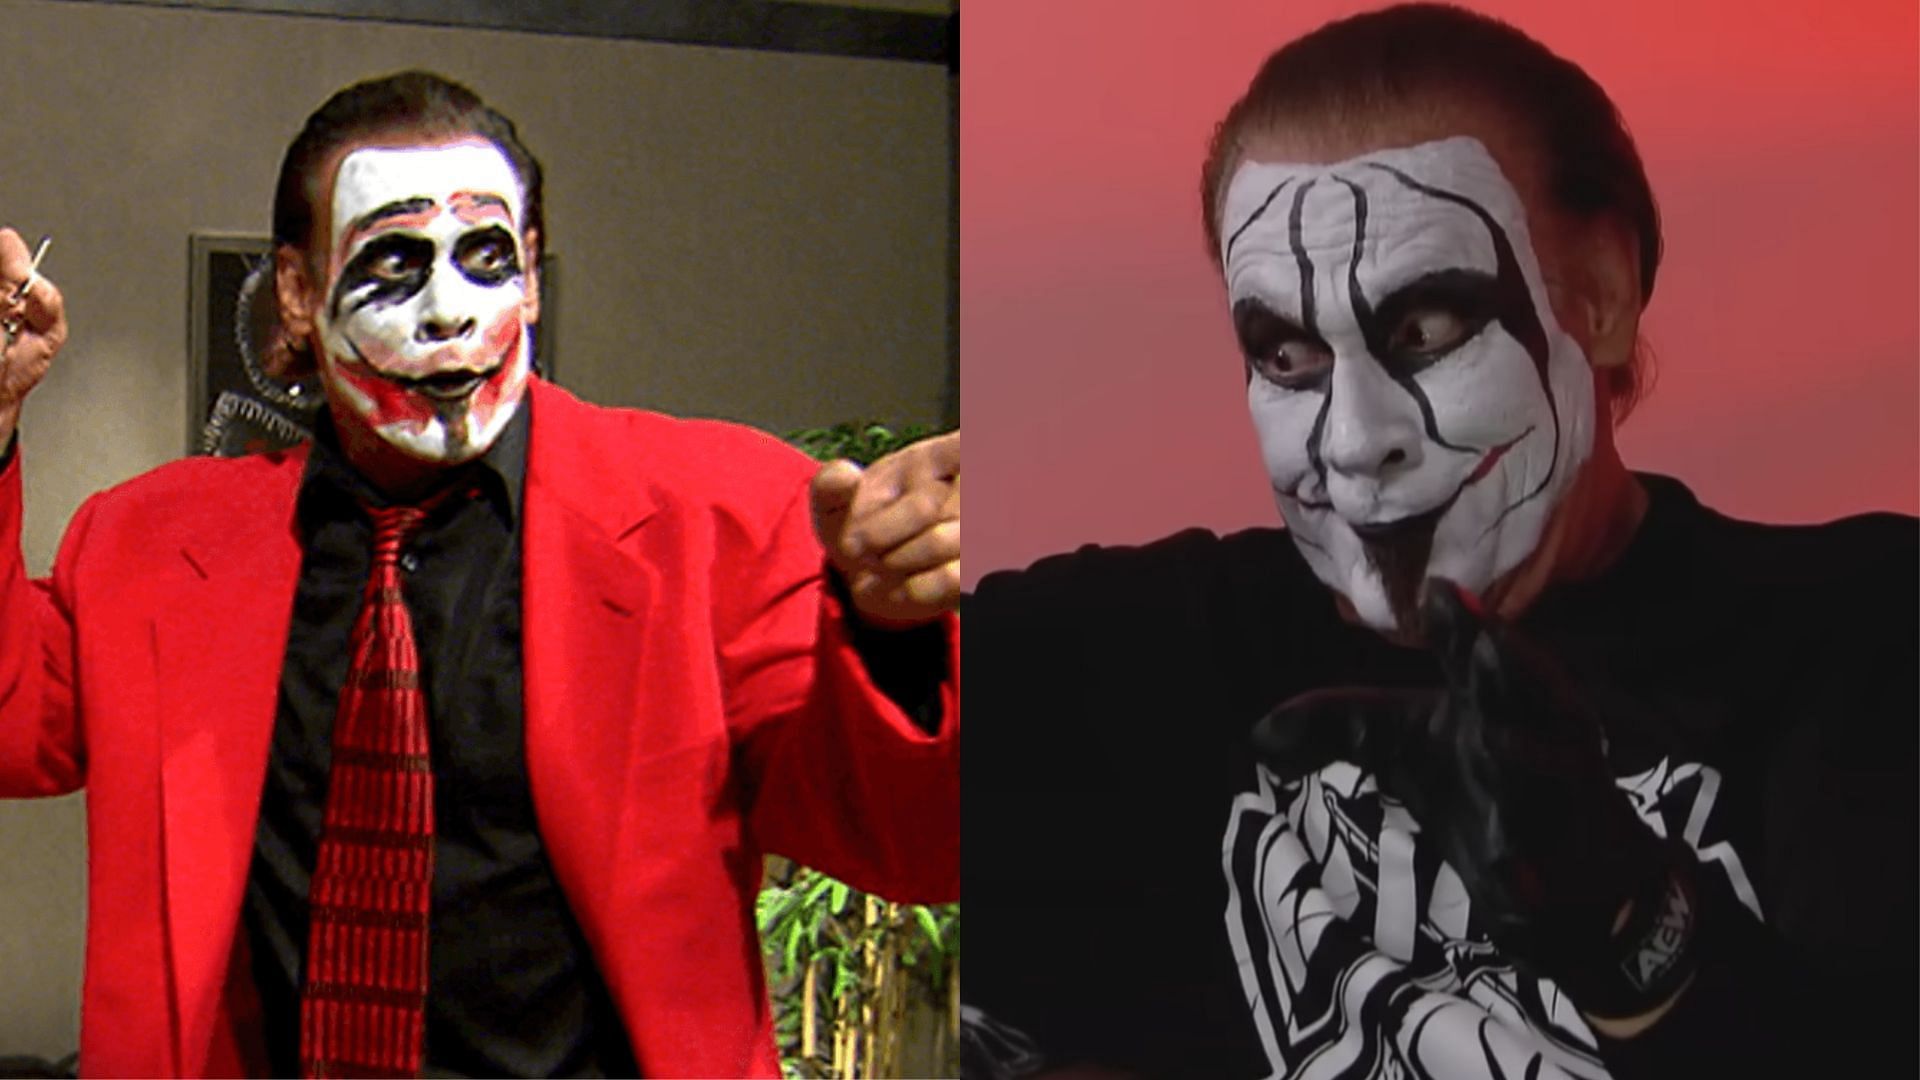 Is the Joker Sting gimmick overrated?